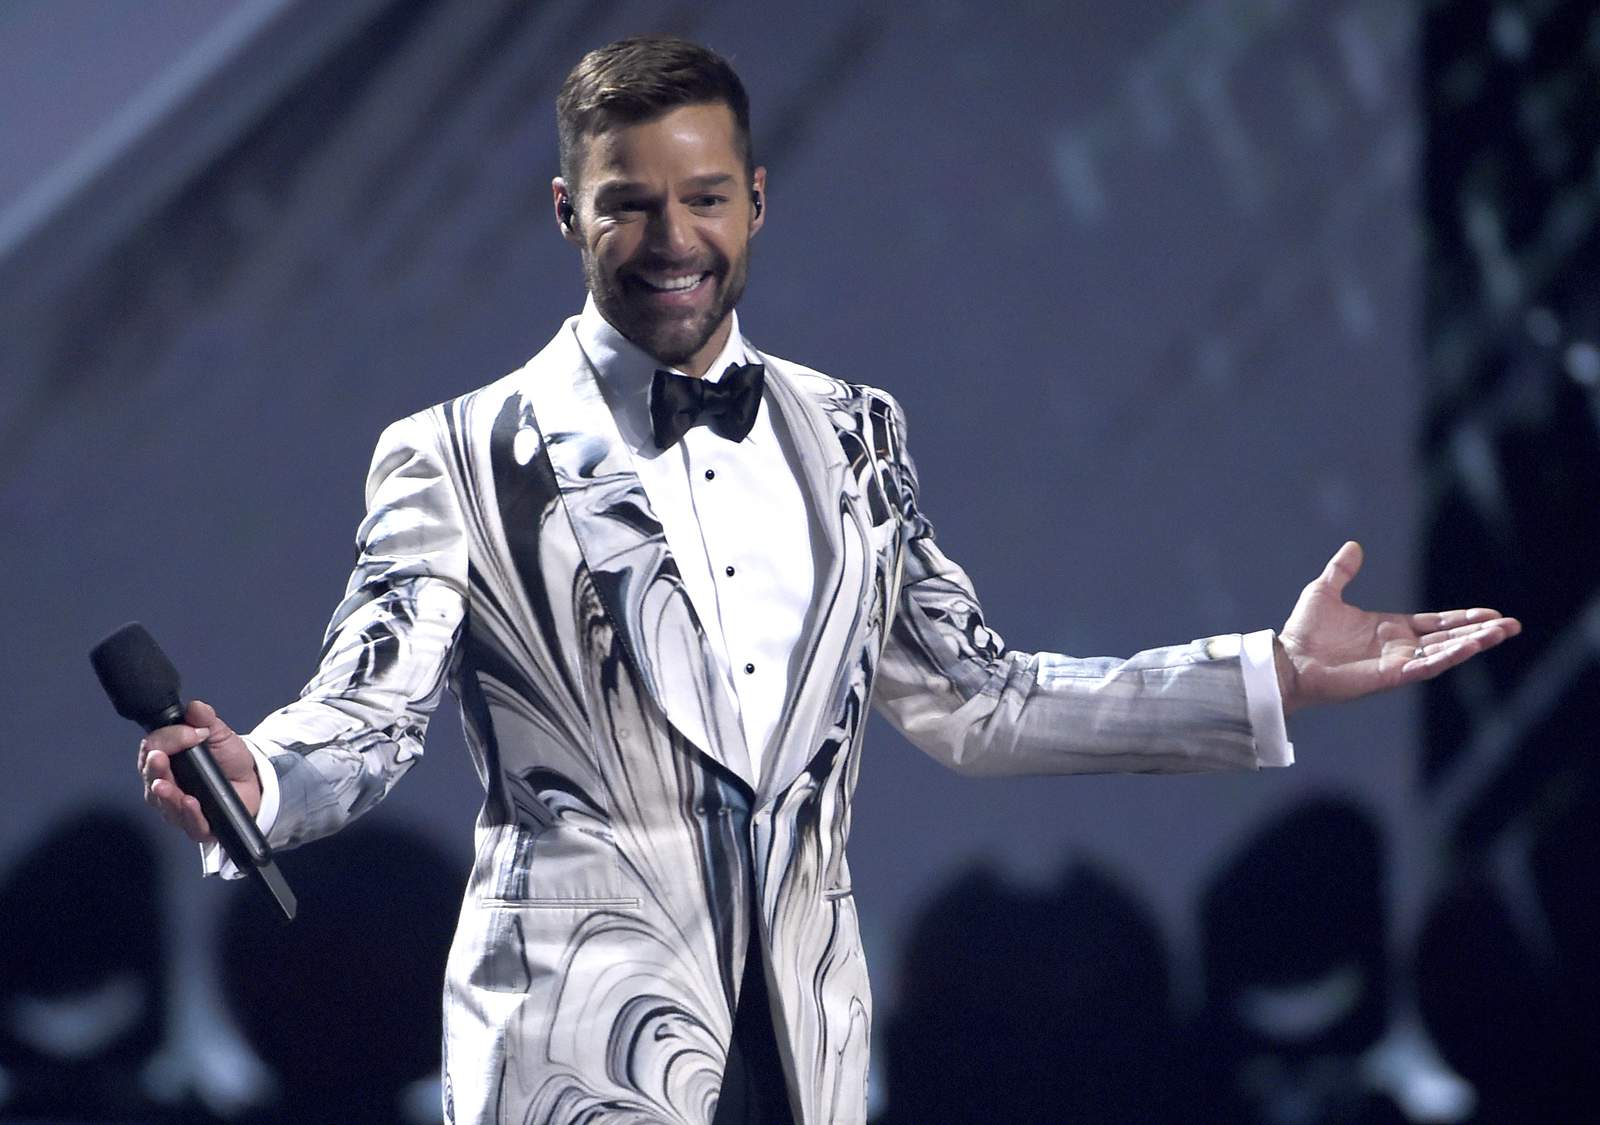 Ricky Martin makes 'Pausa' to channel newly found anxiety